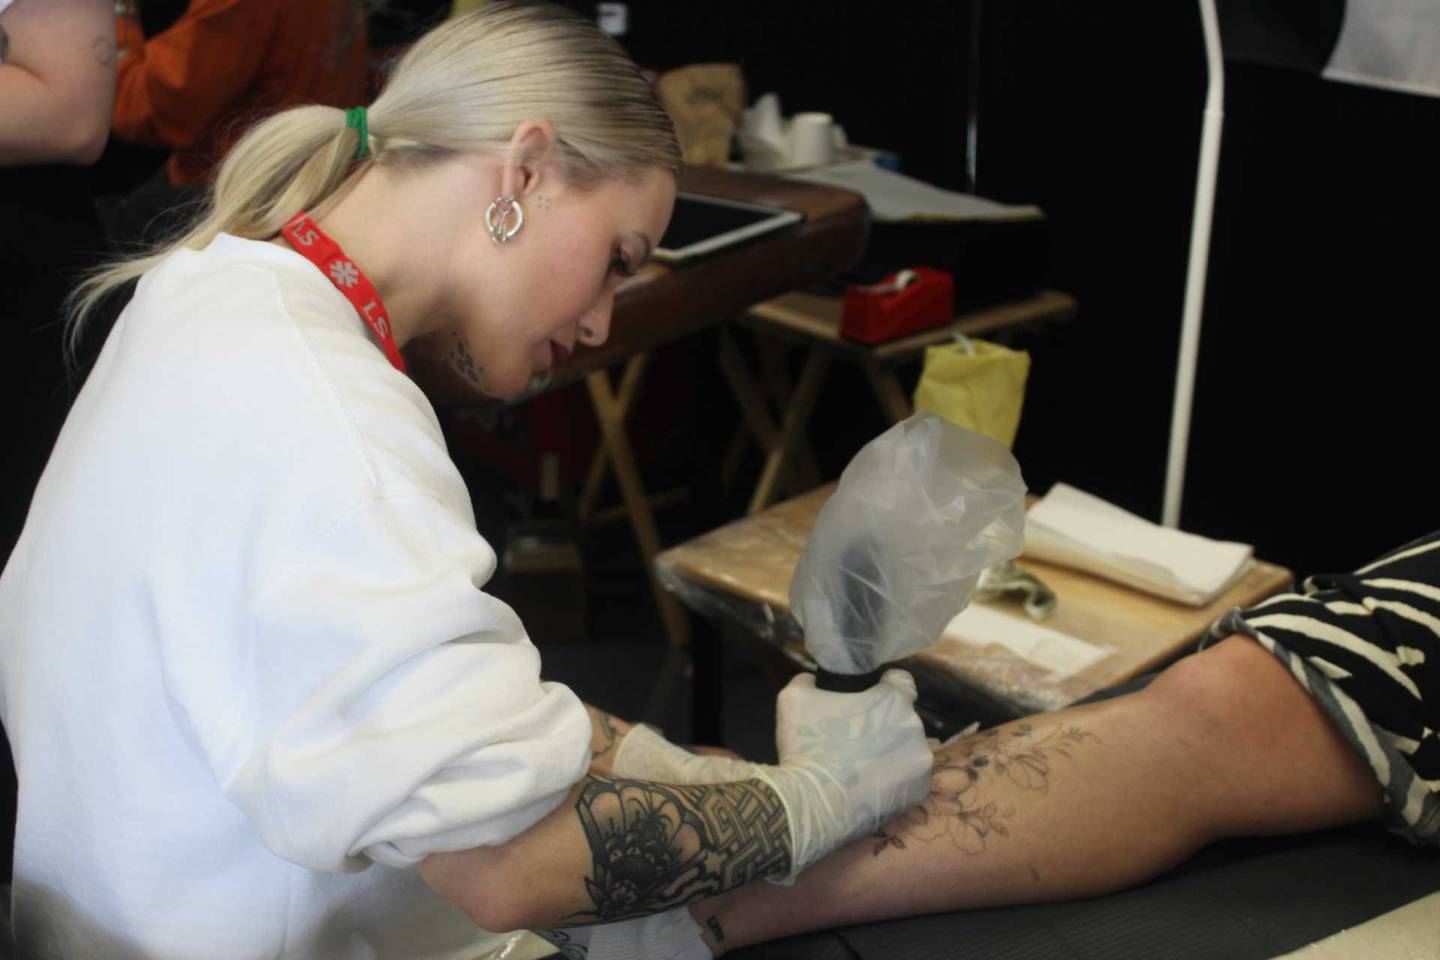 New Plymouth artist Bonnie O'Brien tattooing Laura Jennings at the 2023 New Zealand Tattoo and Art Festival. Photo / Alyssa Smith